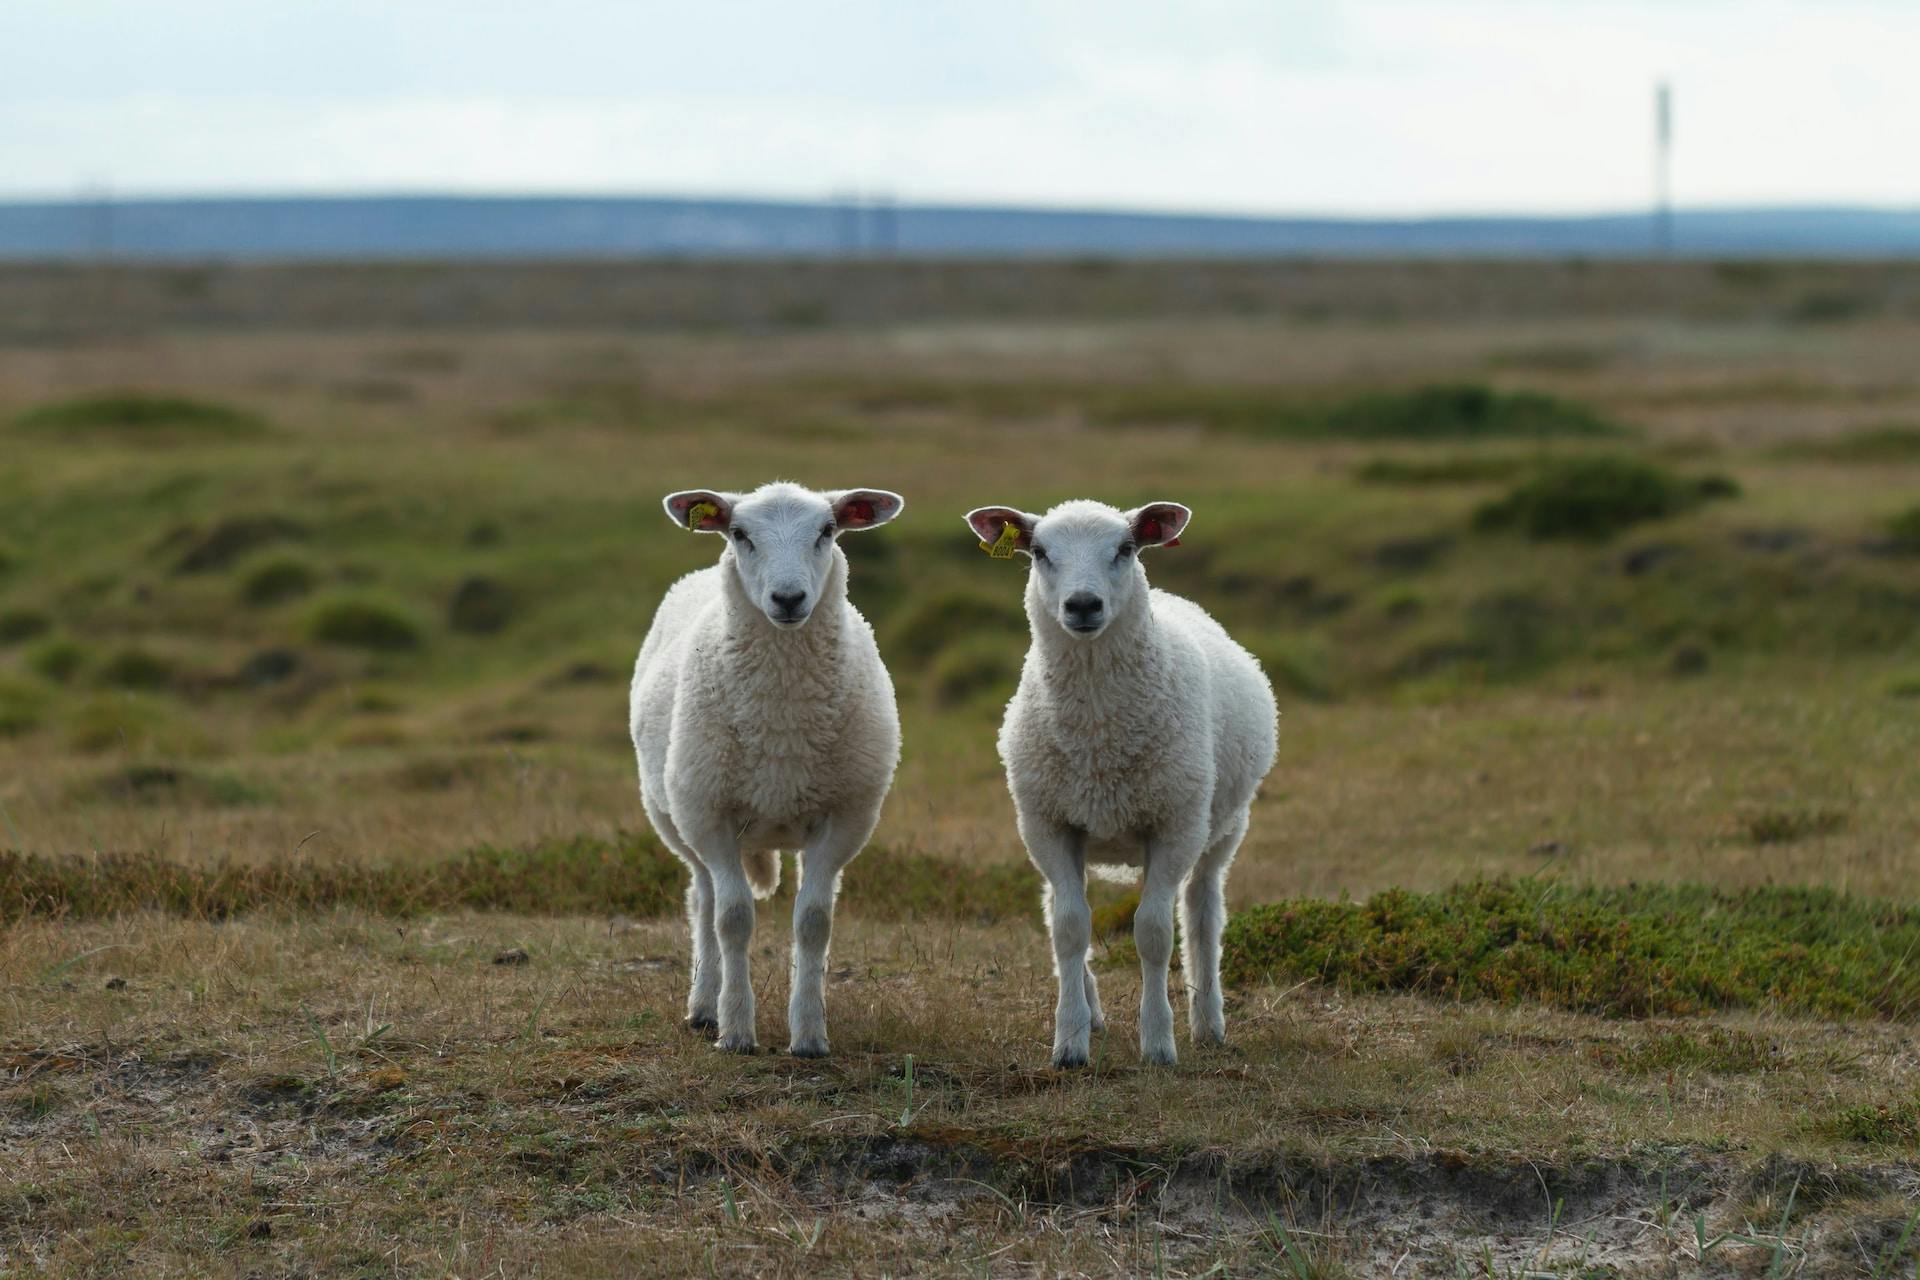 Image of two sheep in a field